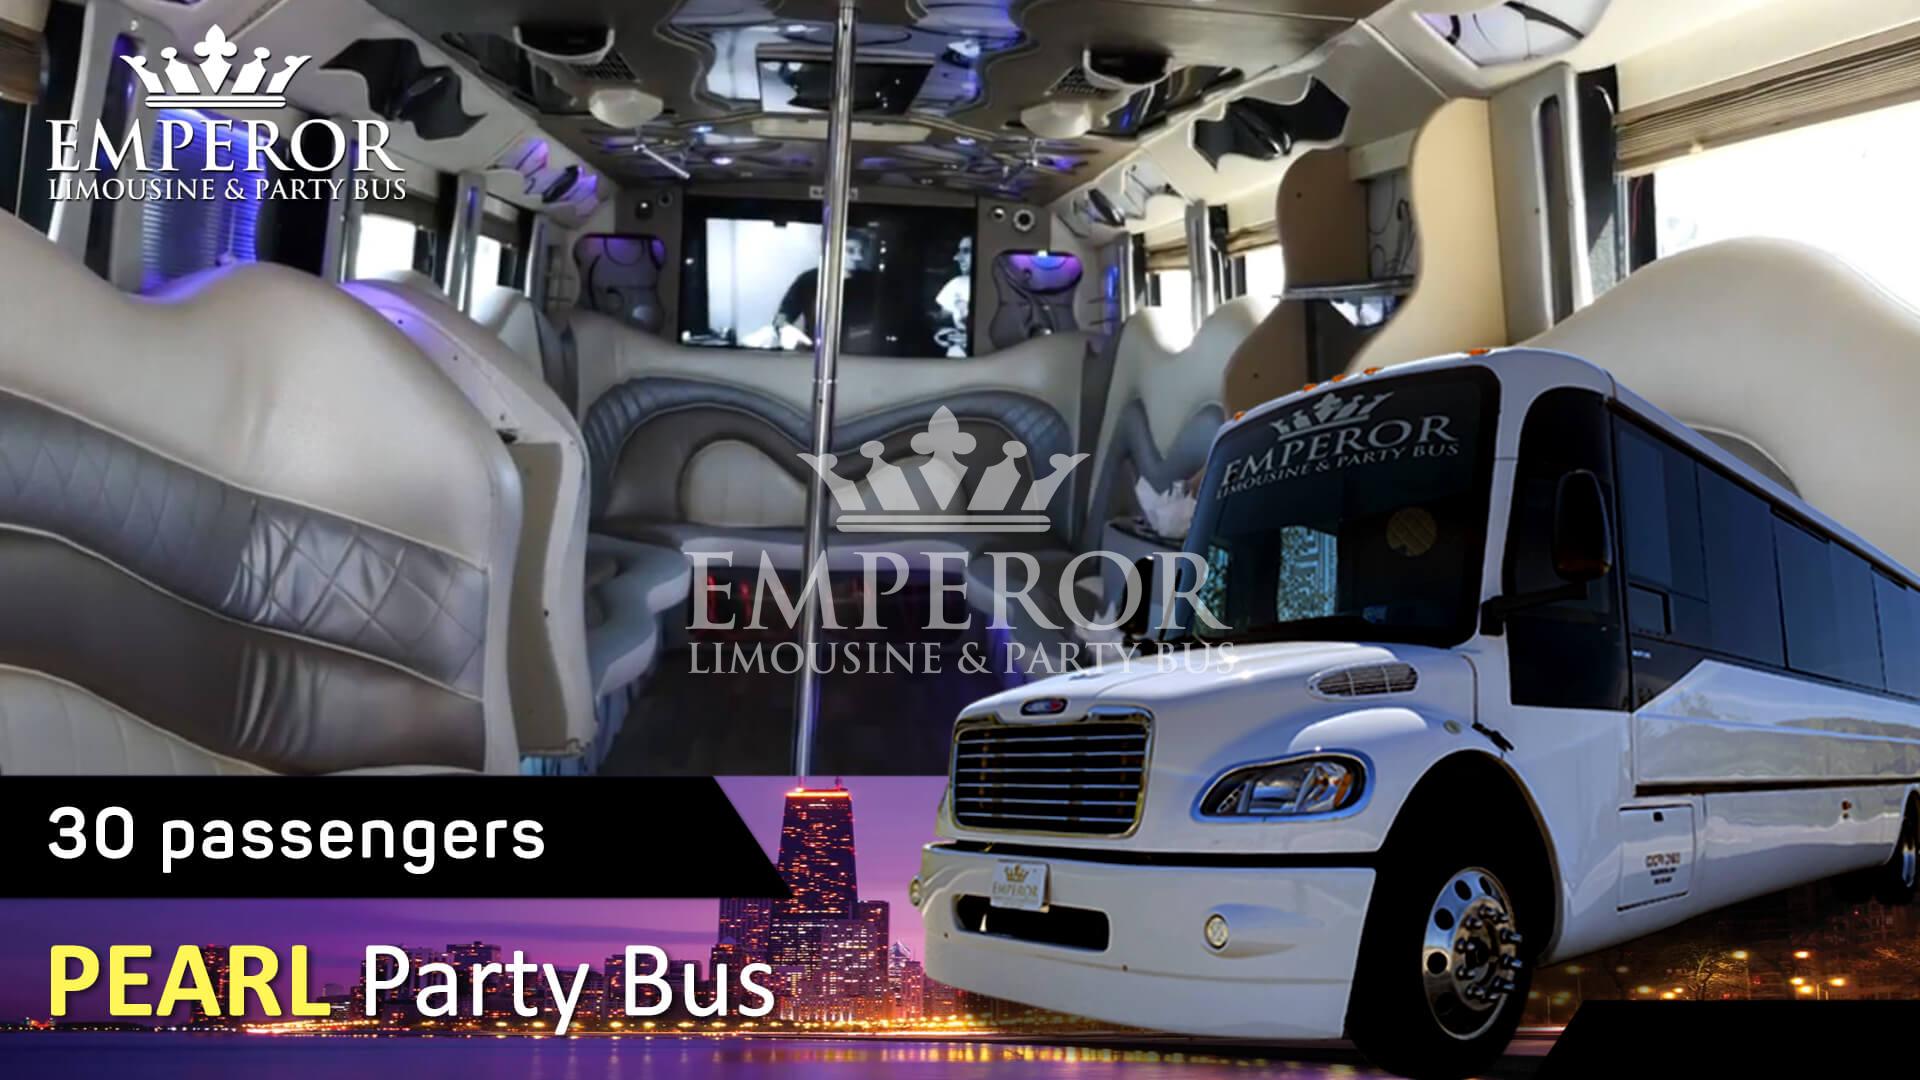 Top party bus for corporate events - Pearl edition